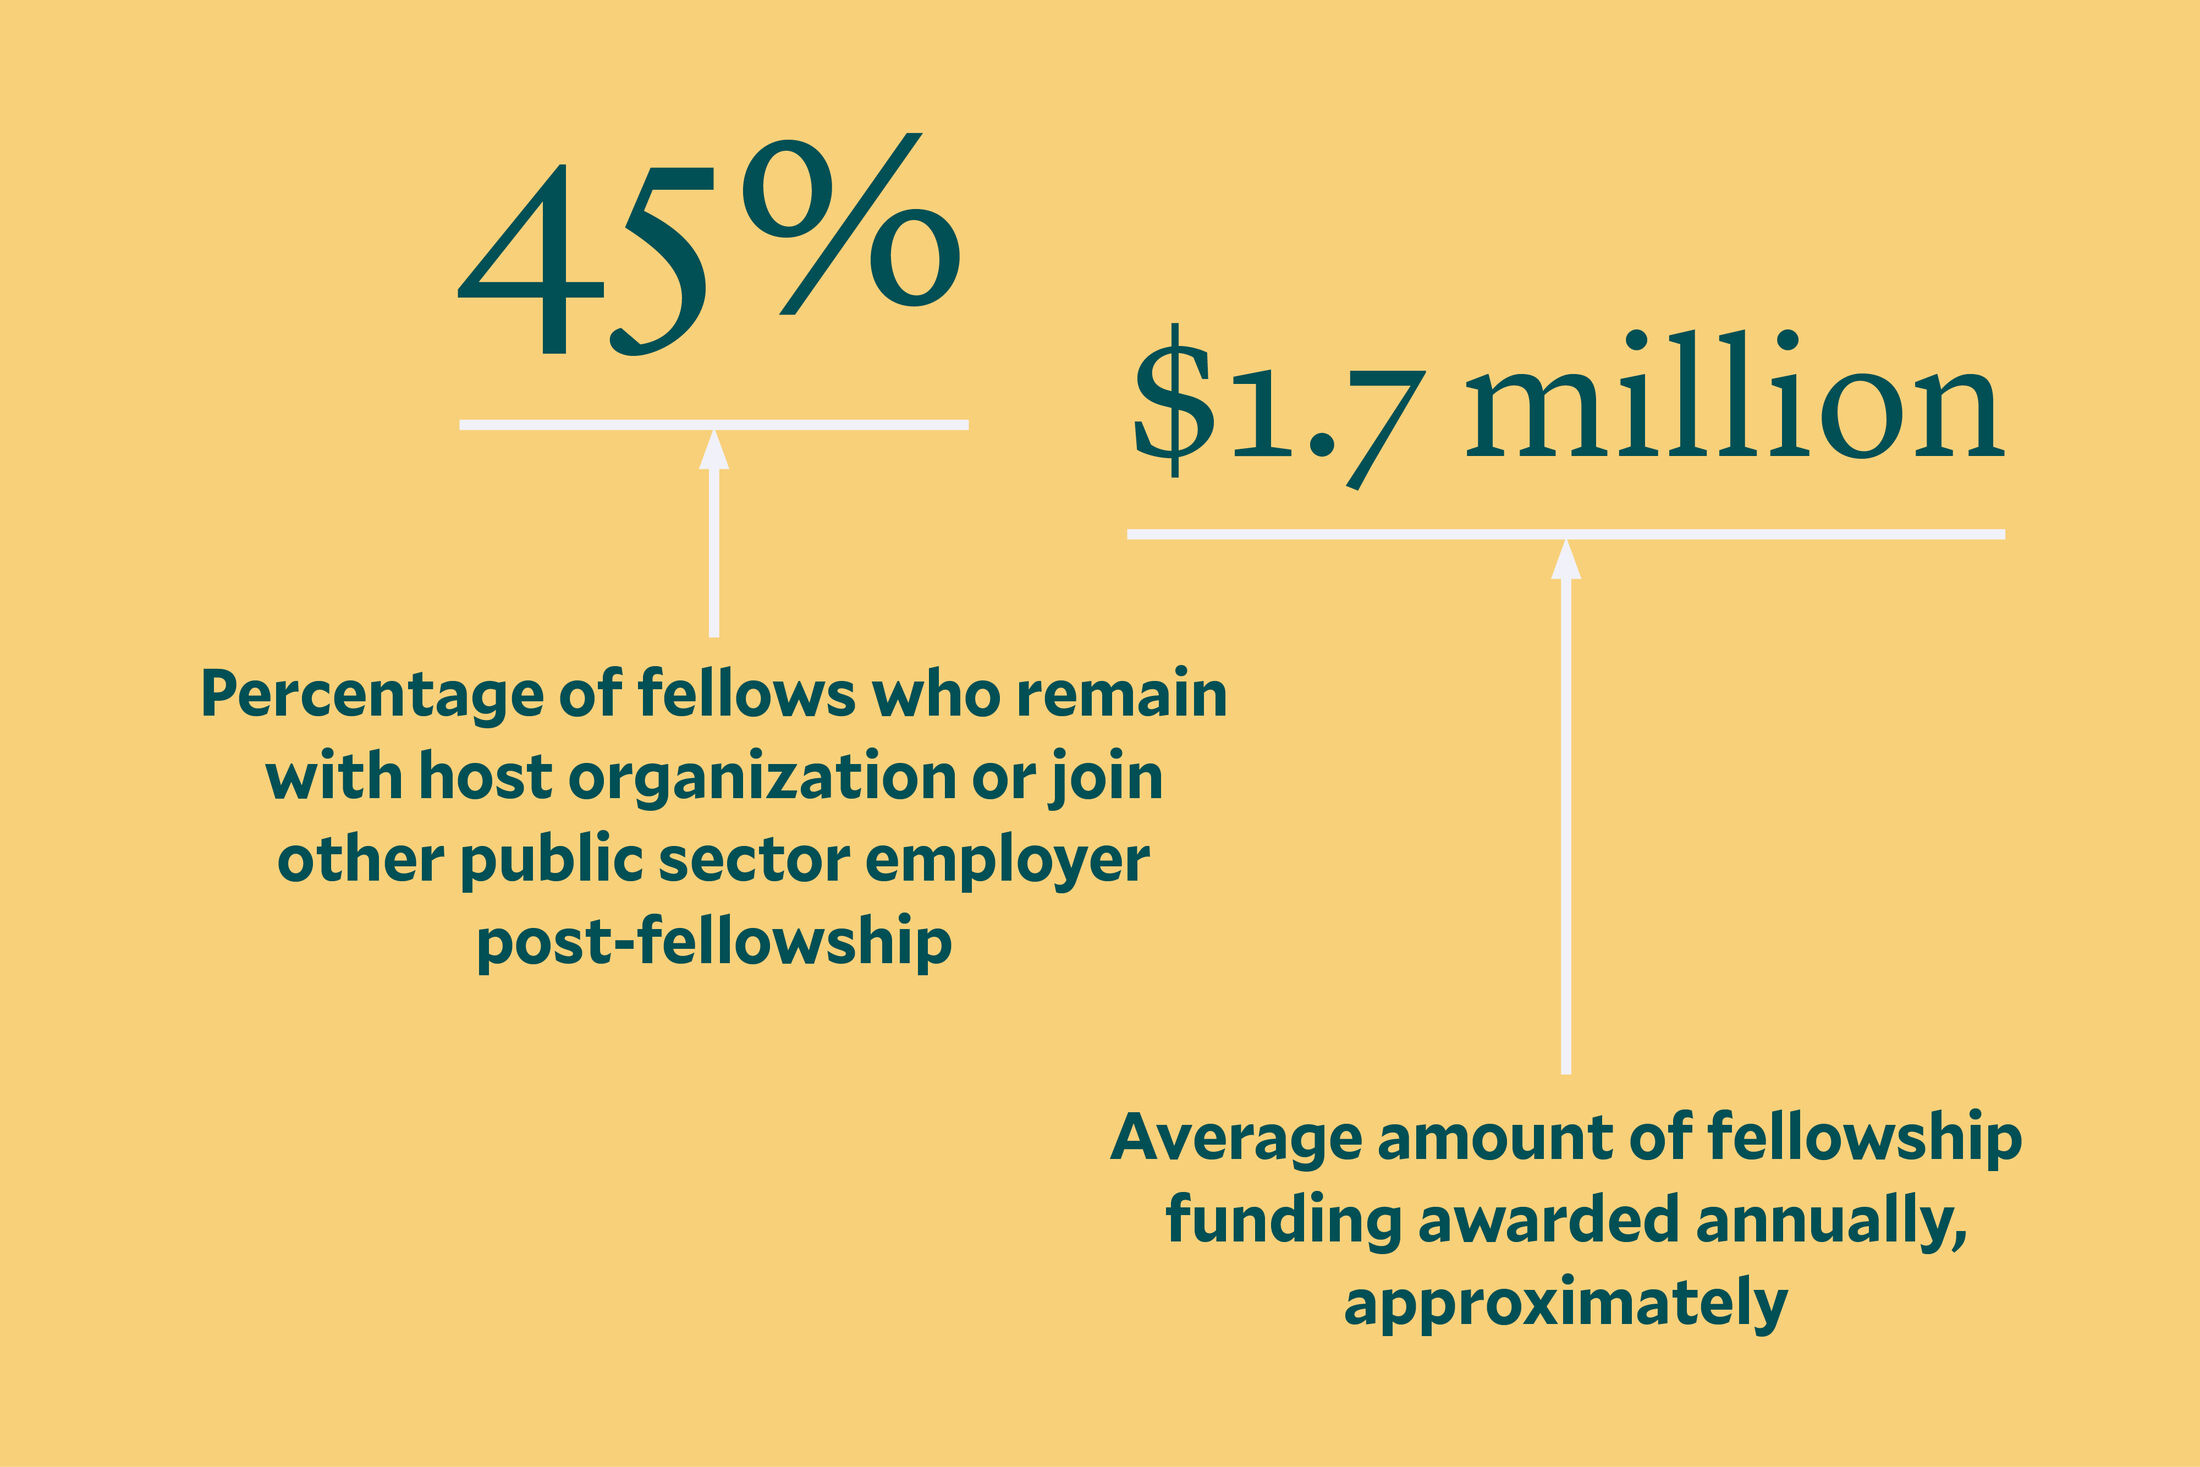 Text with arrows pointing to numbers. “Percentage of fellows who remain with host organizations or join other public sector employer post-fellowship: 45% Average amount of fellowship funding awarded annually, approximately: $1.7 million]